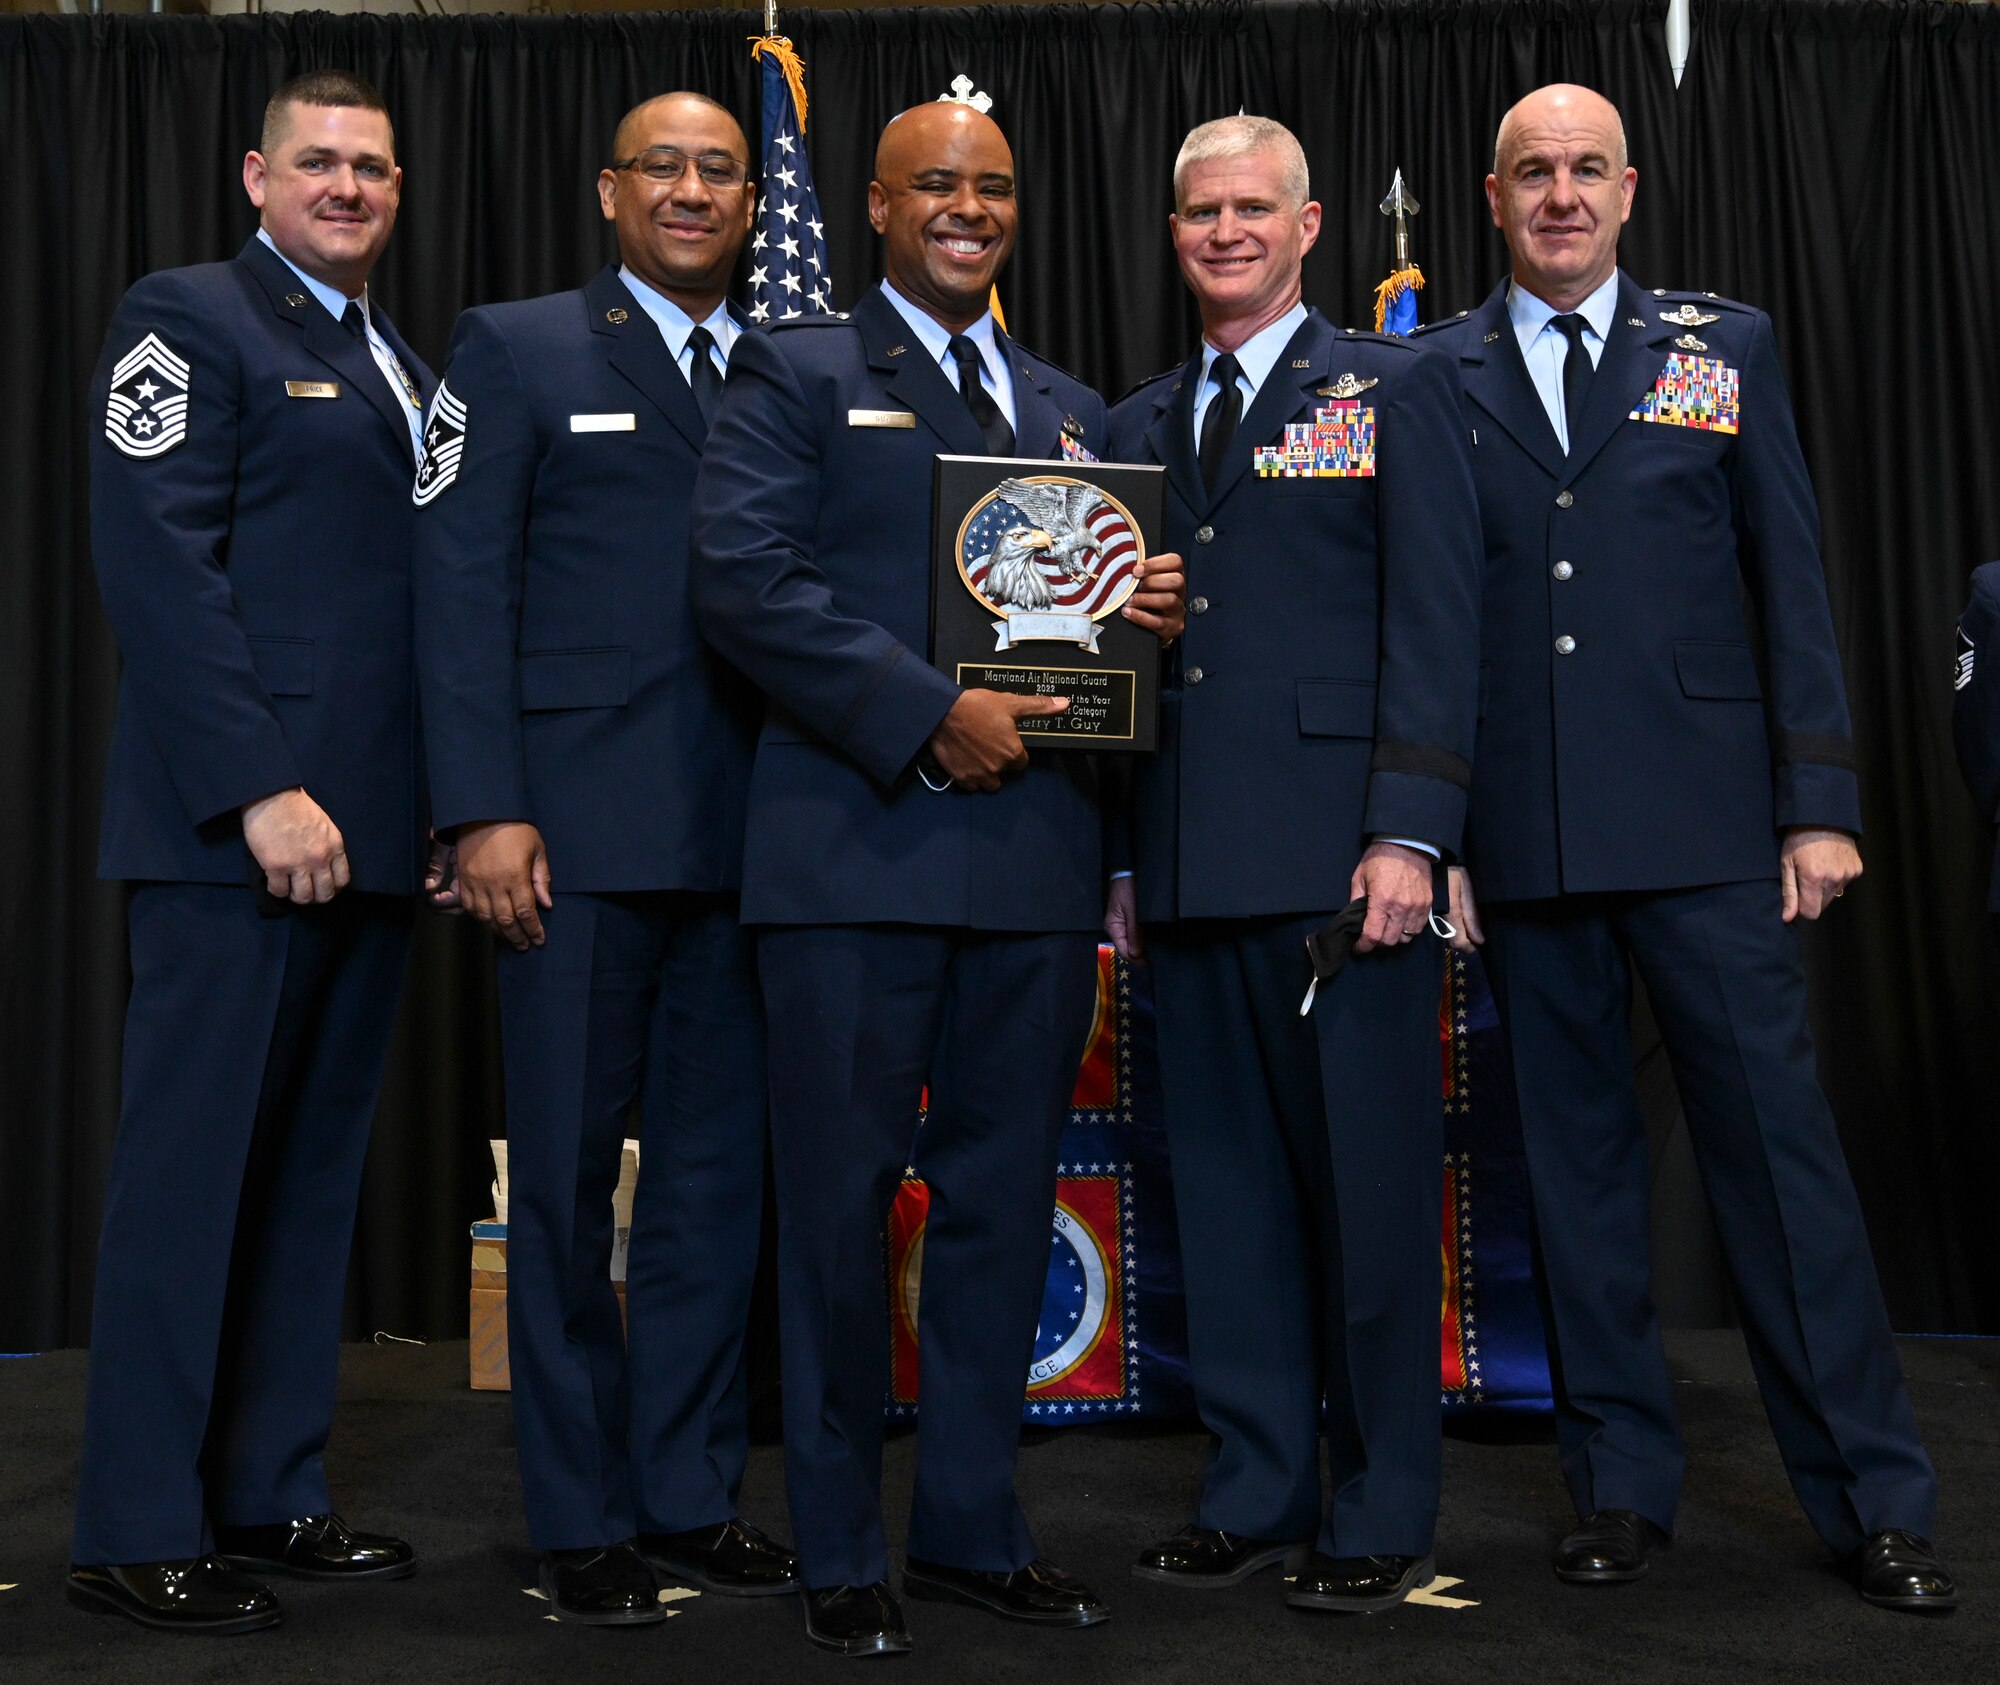 U.S. Air Force 1st Lt. Kerry Guy, 175th Wing company grade officer of the Year, Maryland Air National Guard, receives a plaque at Warfield Air National Guard Base, Middle River, Md., during the 2021 Airman Recognition Ceremony. The yearly event pays tribute to the outstanding achievements of the Maryland Air National Guard and names the wing's outstanding Airman of the year. (U.S. Air National Guard photo by Amn Alexandra Huettner)